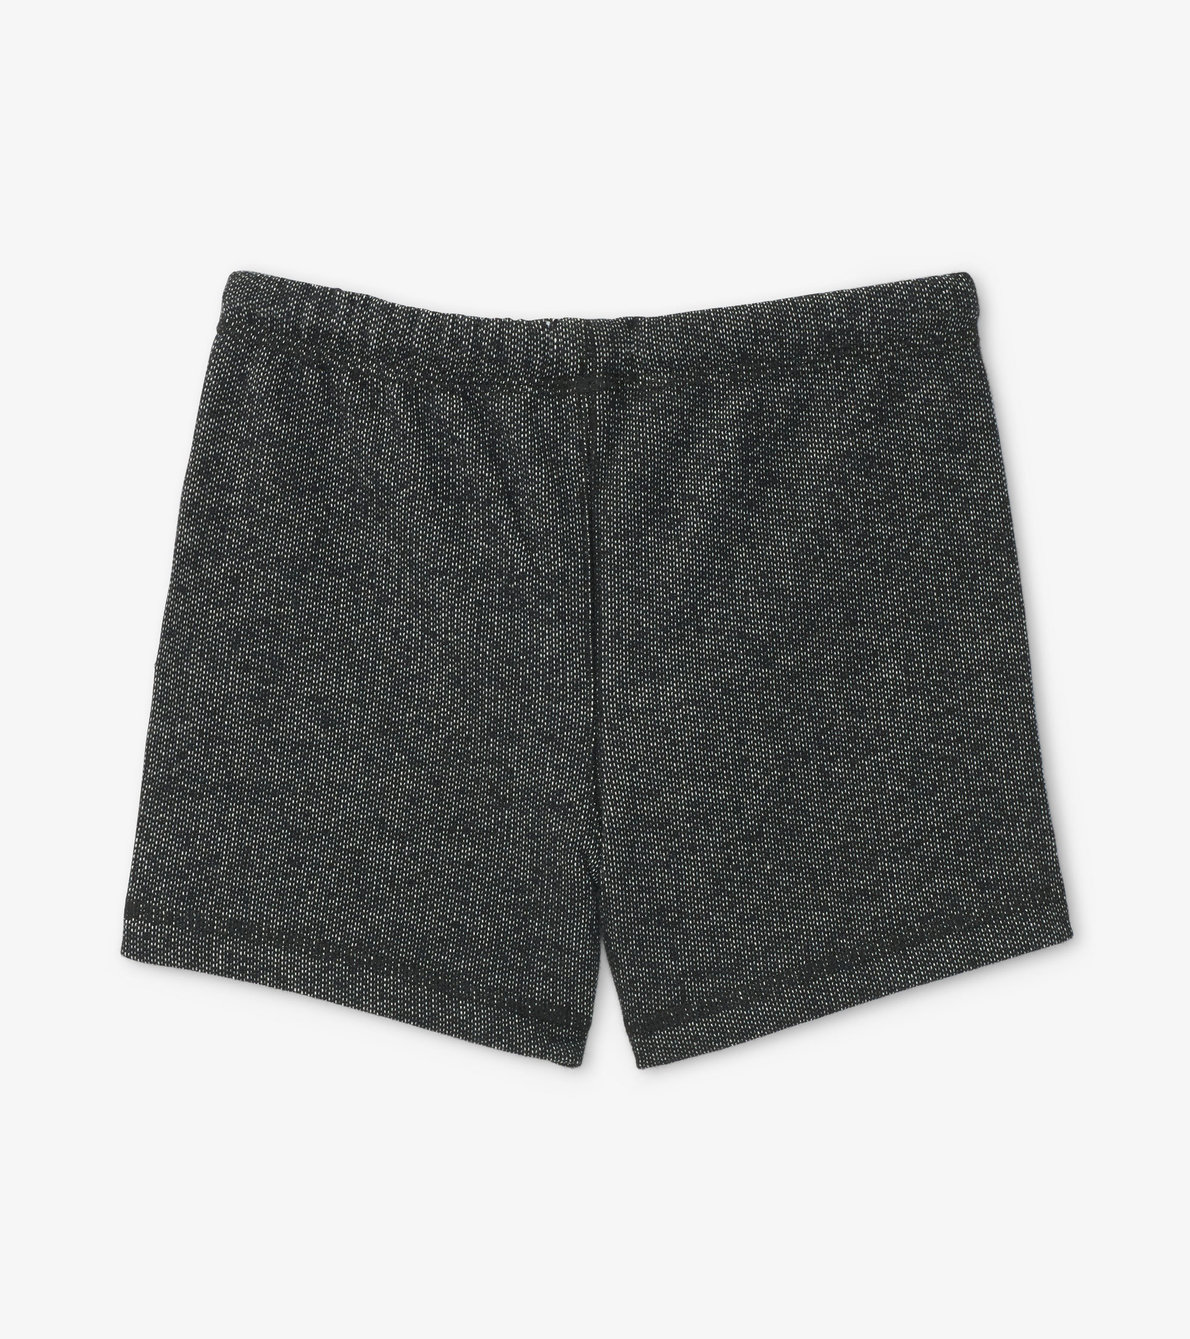 View larger image of Charcoal Bear Kids Heritage Shorts